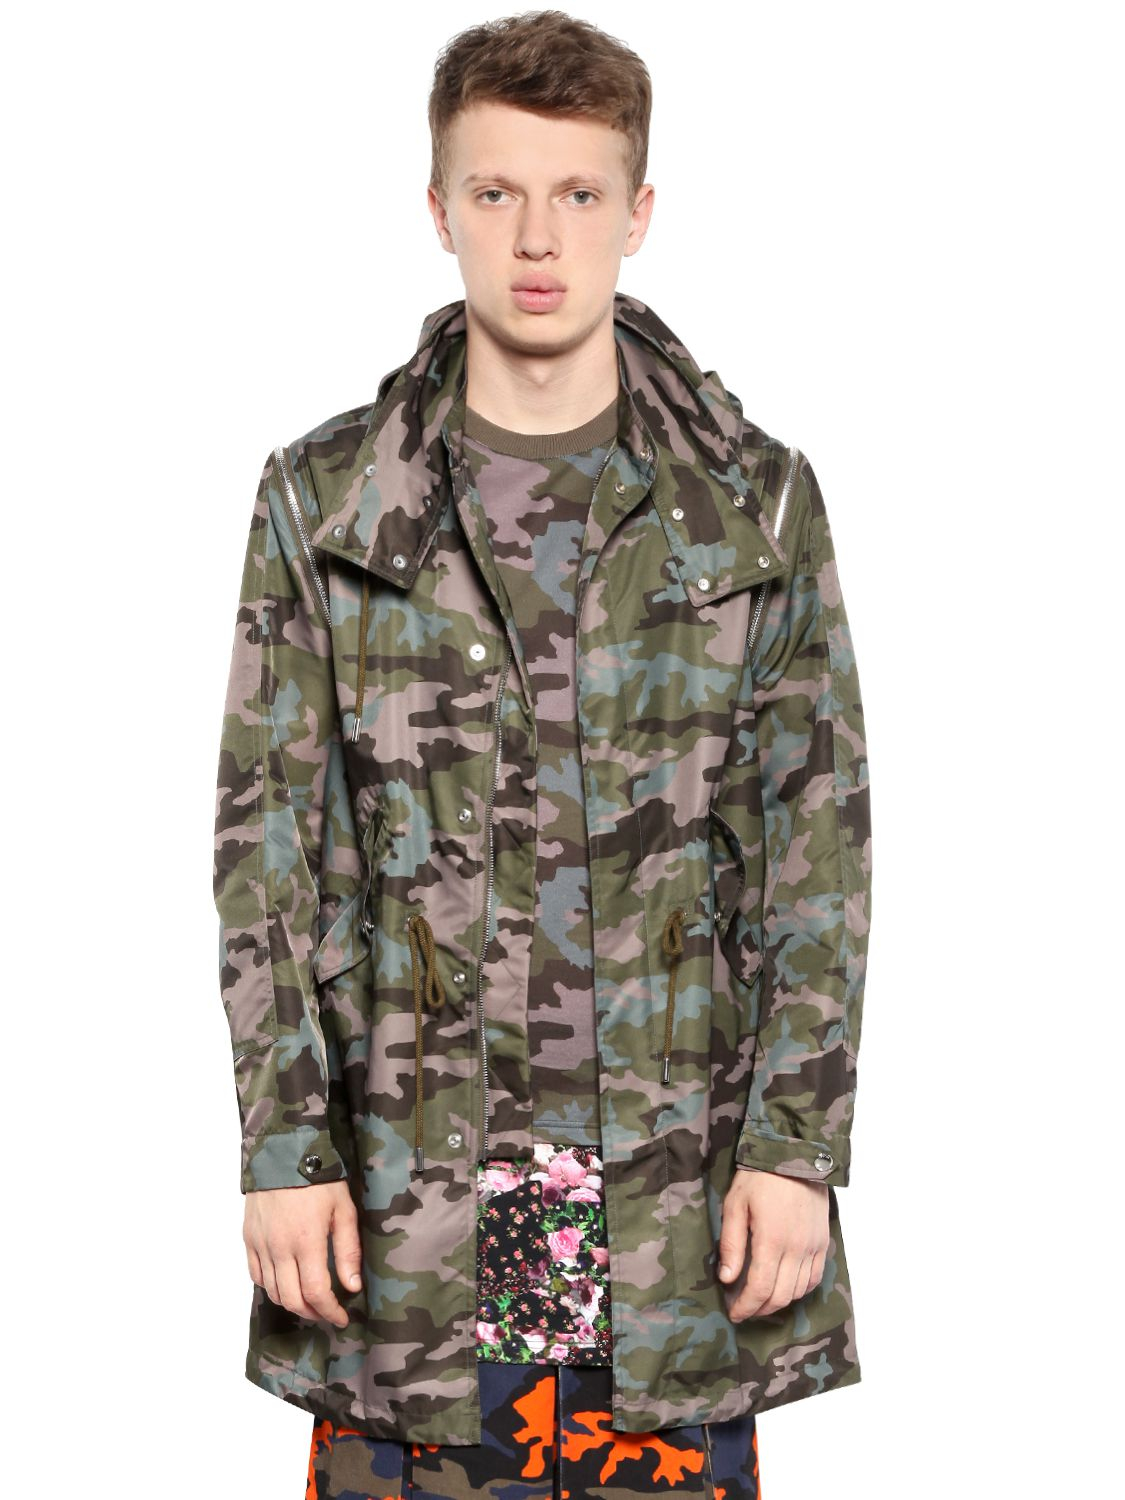 Givenchy Camouflage Parka Jacket for 